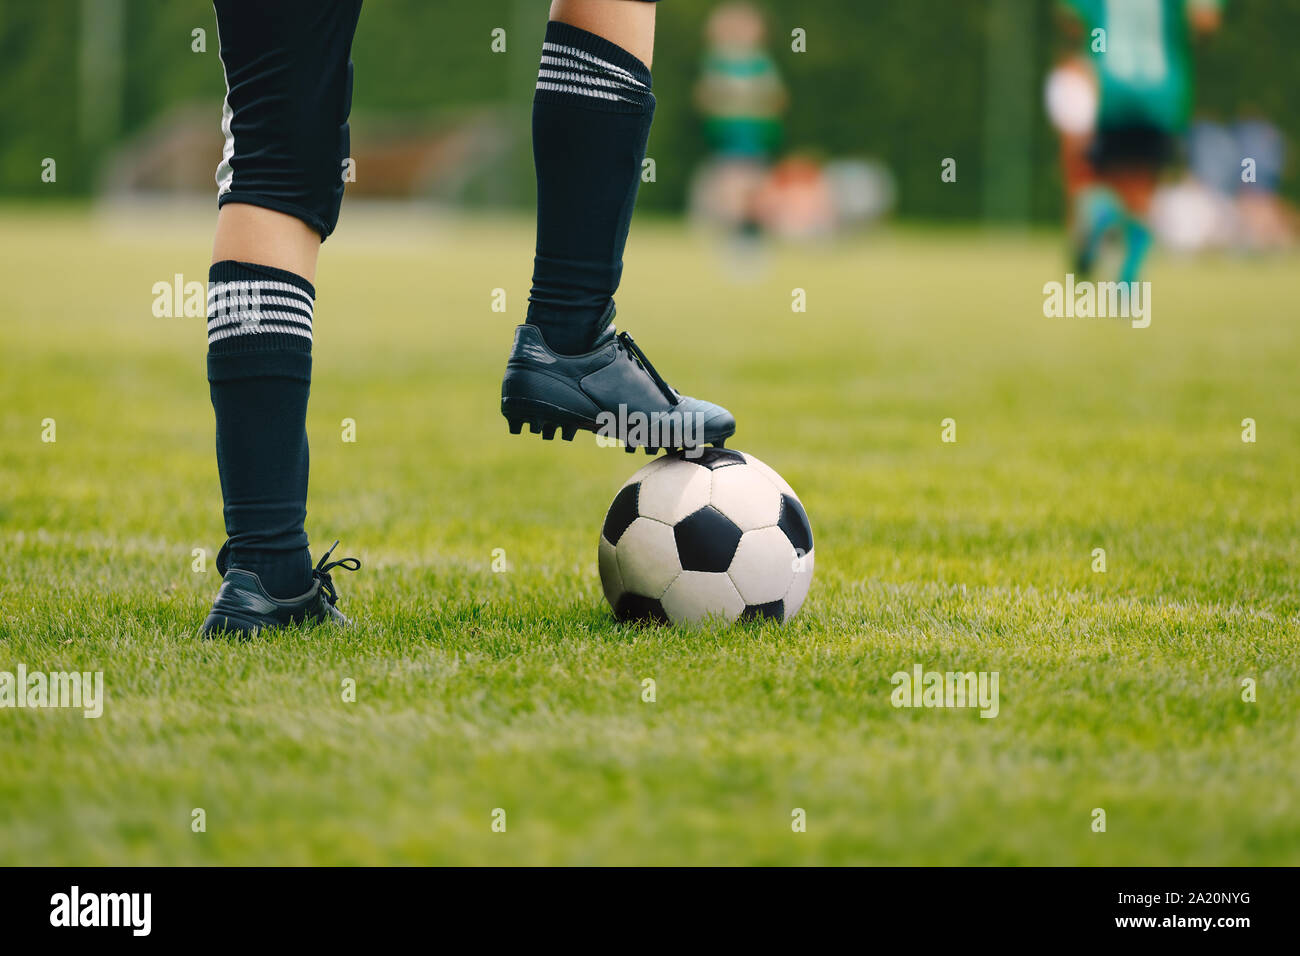 One young football player with ball on grass field. Boy in a sportswear. Player wearing black football socks and soccer cleats. Football horizontal cl Stock Photo